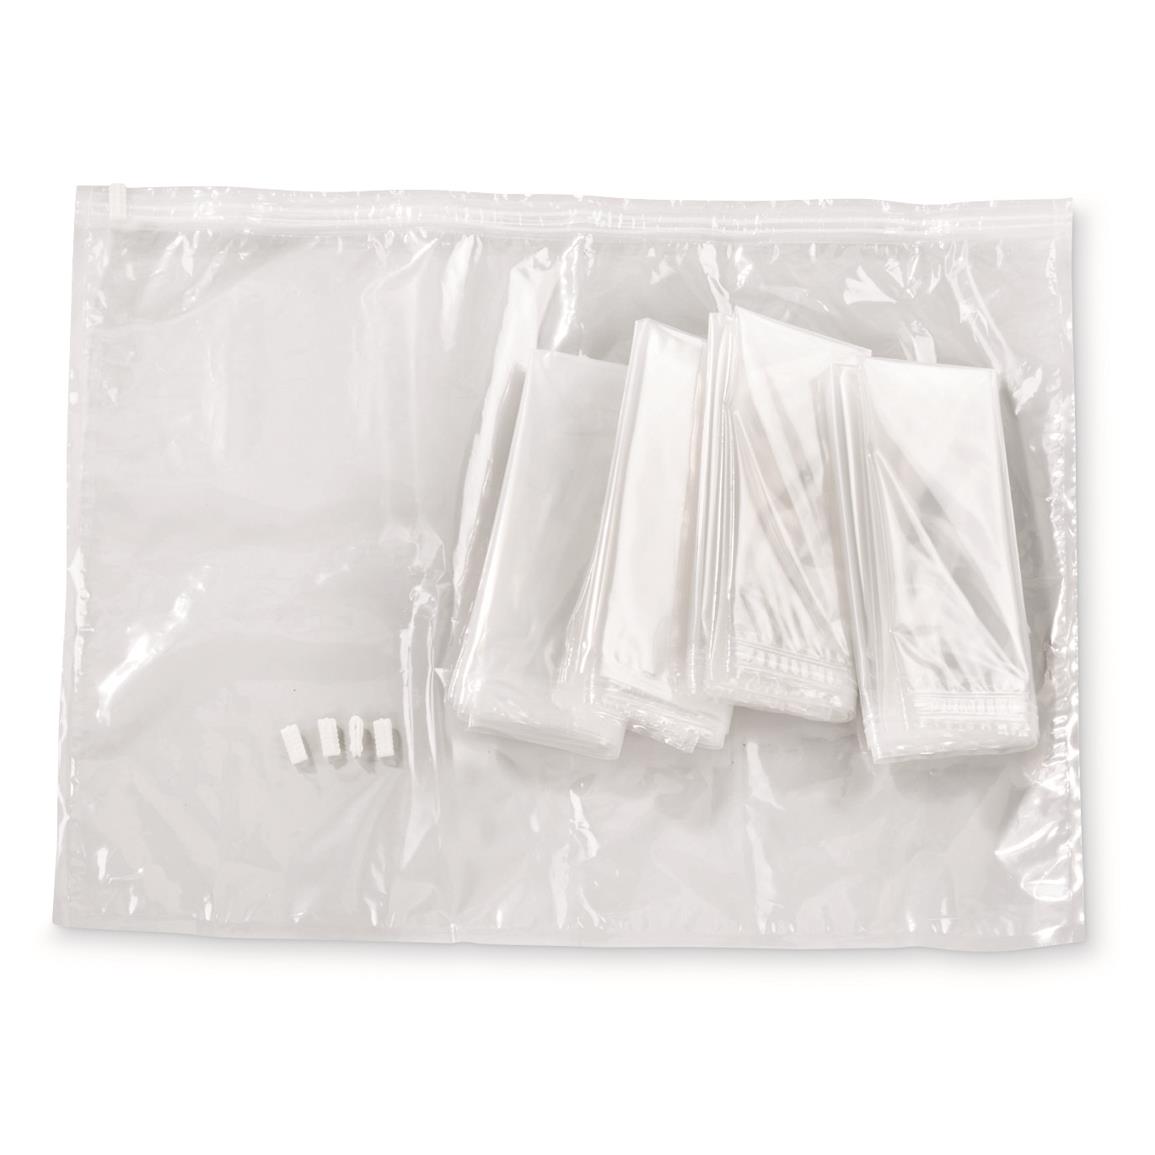 U.S. Police Surplus XL Odor Resistant Sealable Bags, 32" x 25", 5 Pack, New